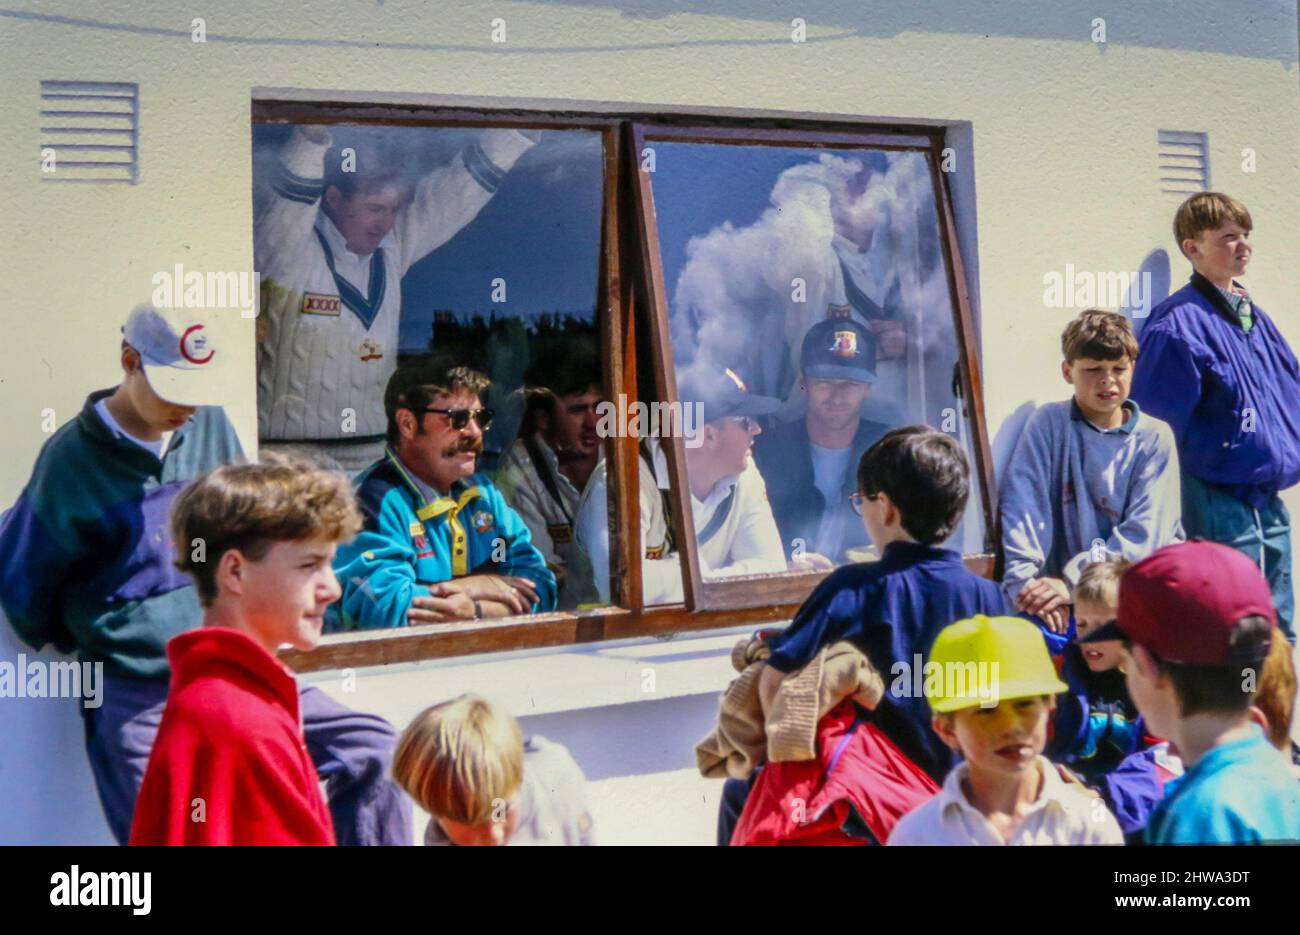 10 July 1993 International Cricket - One day exhibition game, Ireland v Australia at Castle Avenue, Clontarf, Dublin, Ireland. David Boon (front left) with Shane Warne beside him watch the game from the changing room. Neither played in the game.  (Scorecard - Australia 361/3 declared. Ireland 89 all out. Australia won by 272 runs) Stock Photo